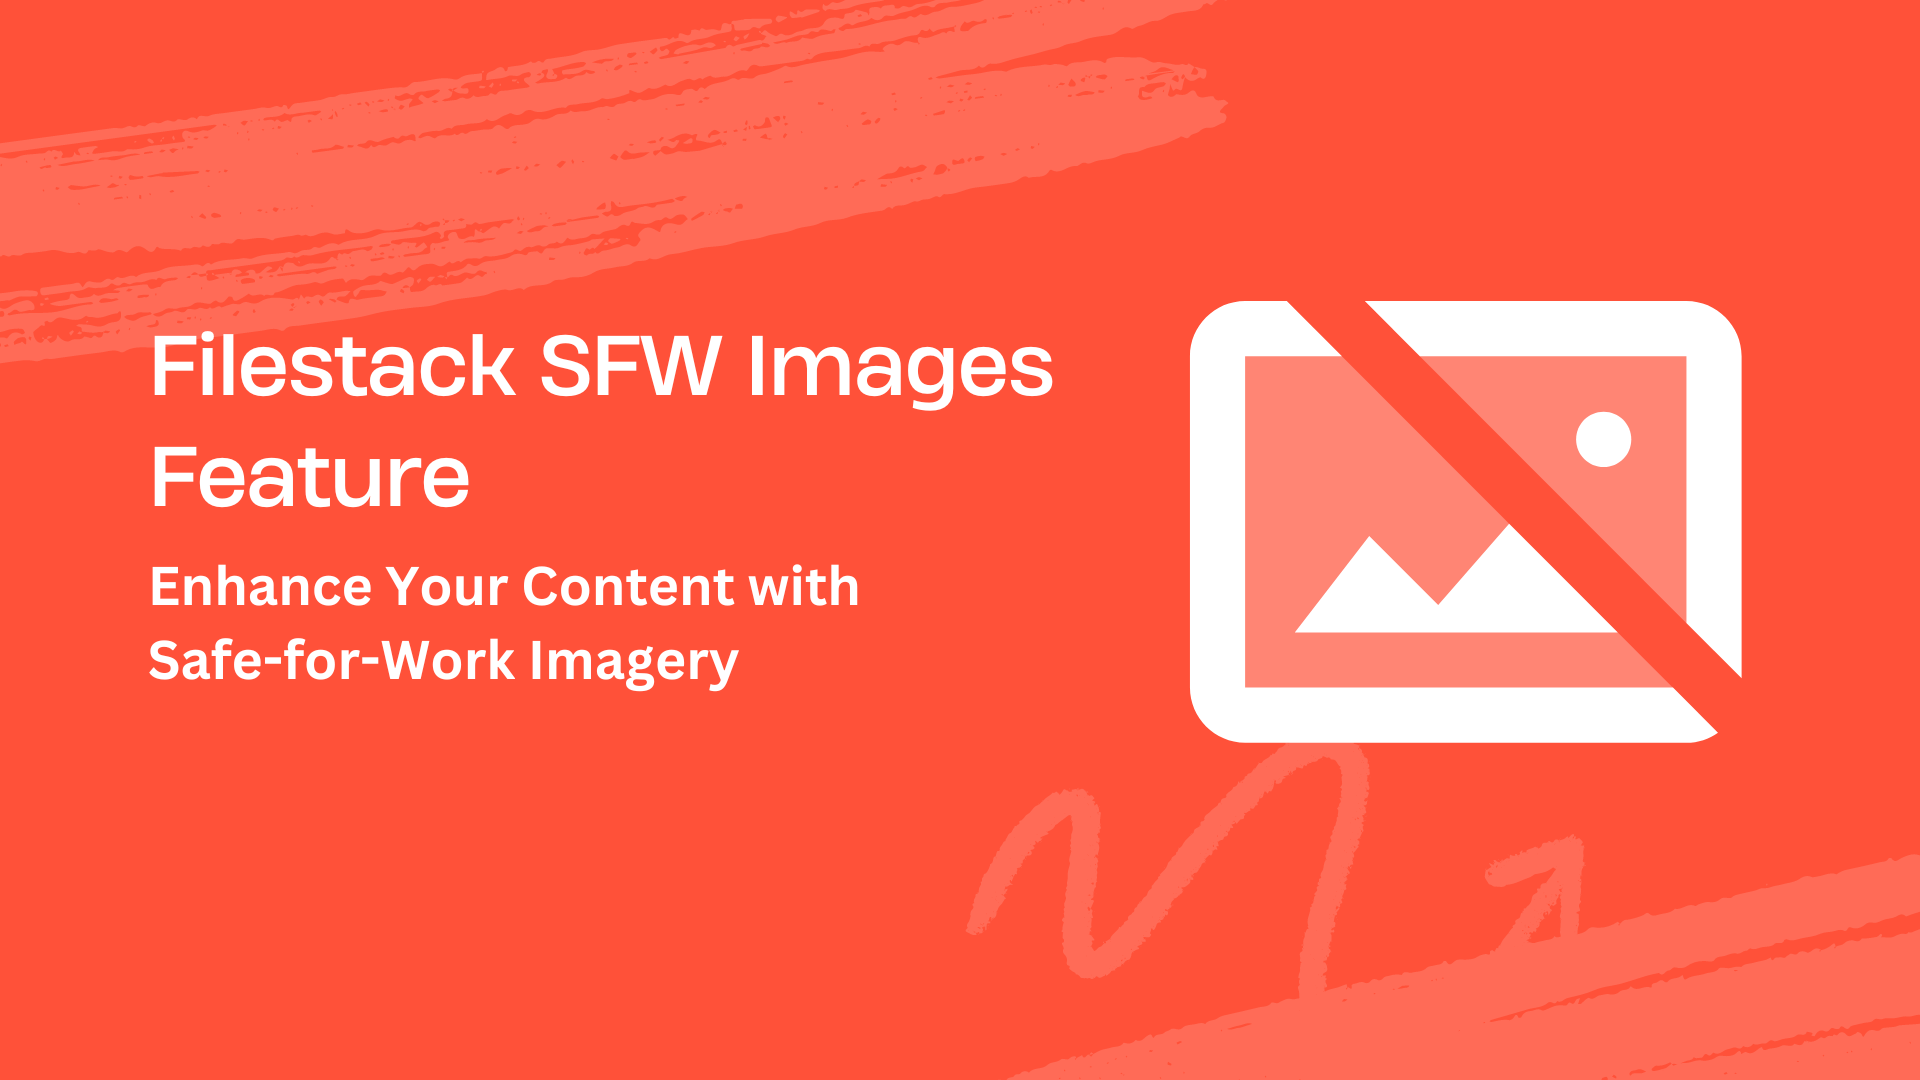 Filestack SFW Images Feature: Enhance Your Content with Safe-for-Work Imagery